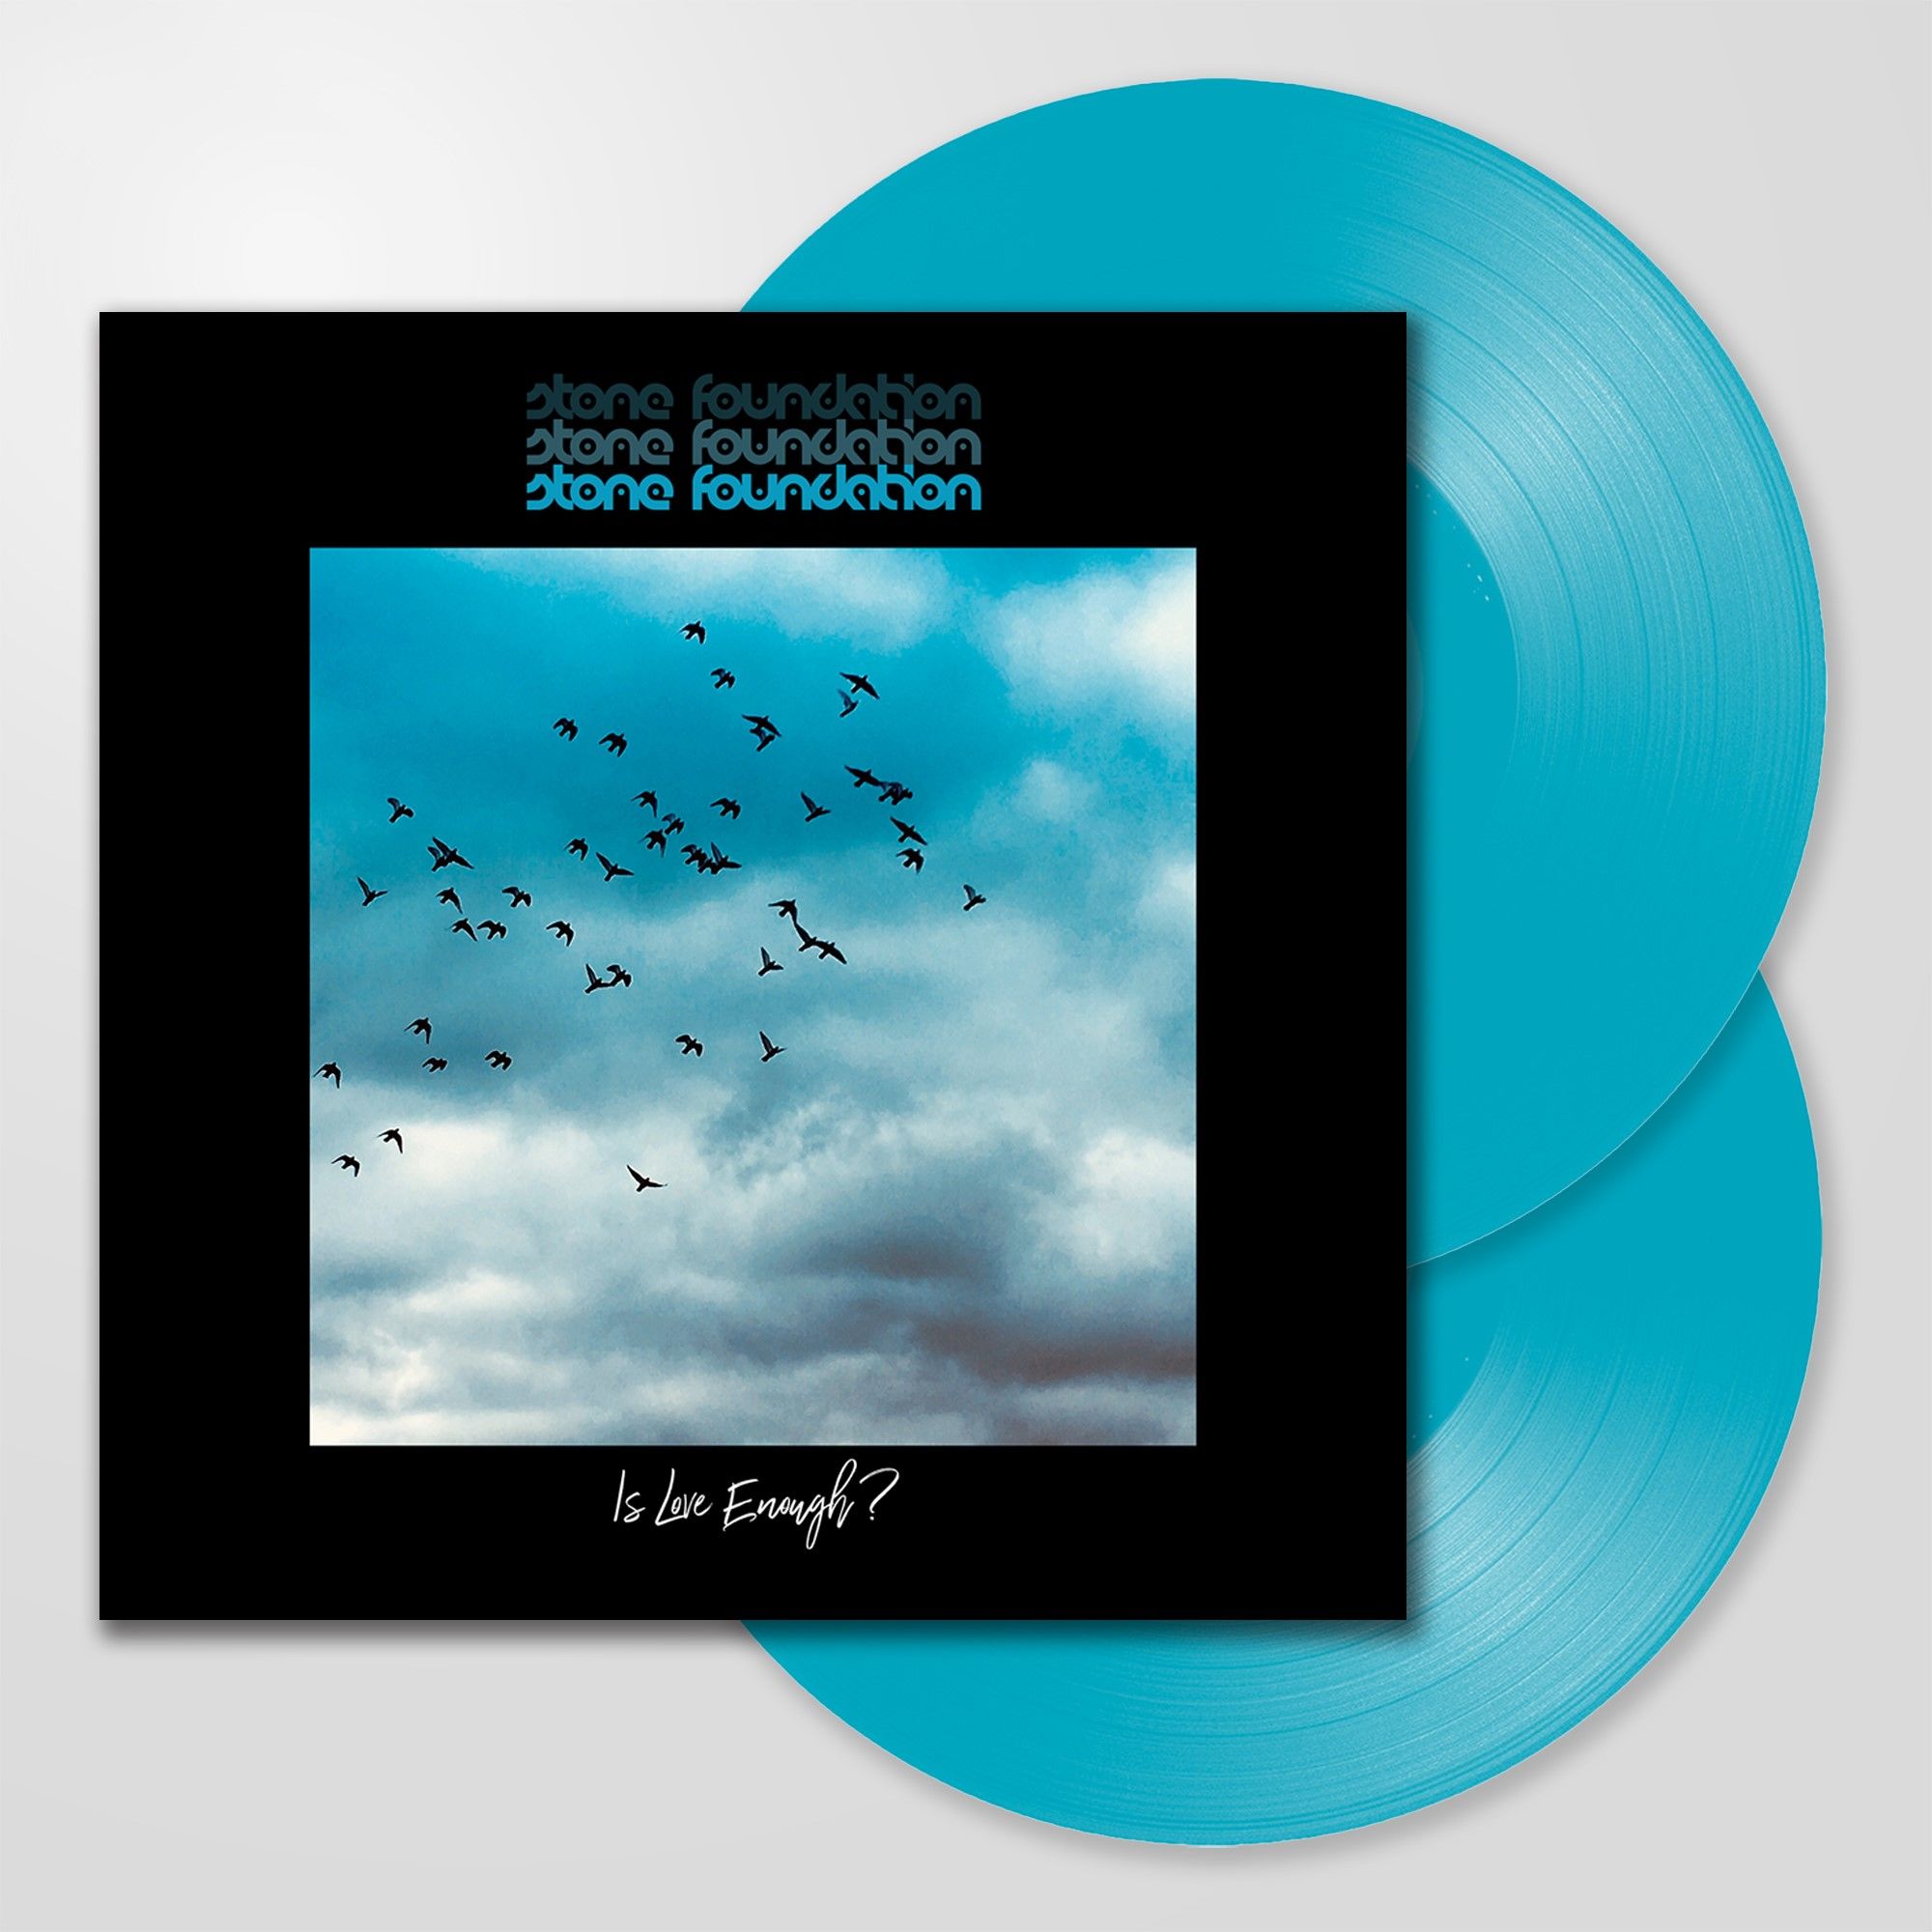 STONE FOUNDATION - Is Love Enough? - 2LP - Limited Blue Vinyl [OCT 2nd]